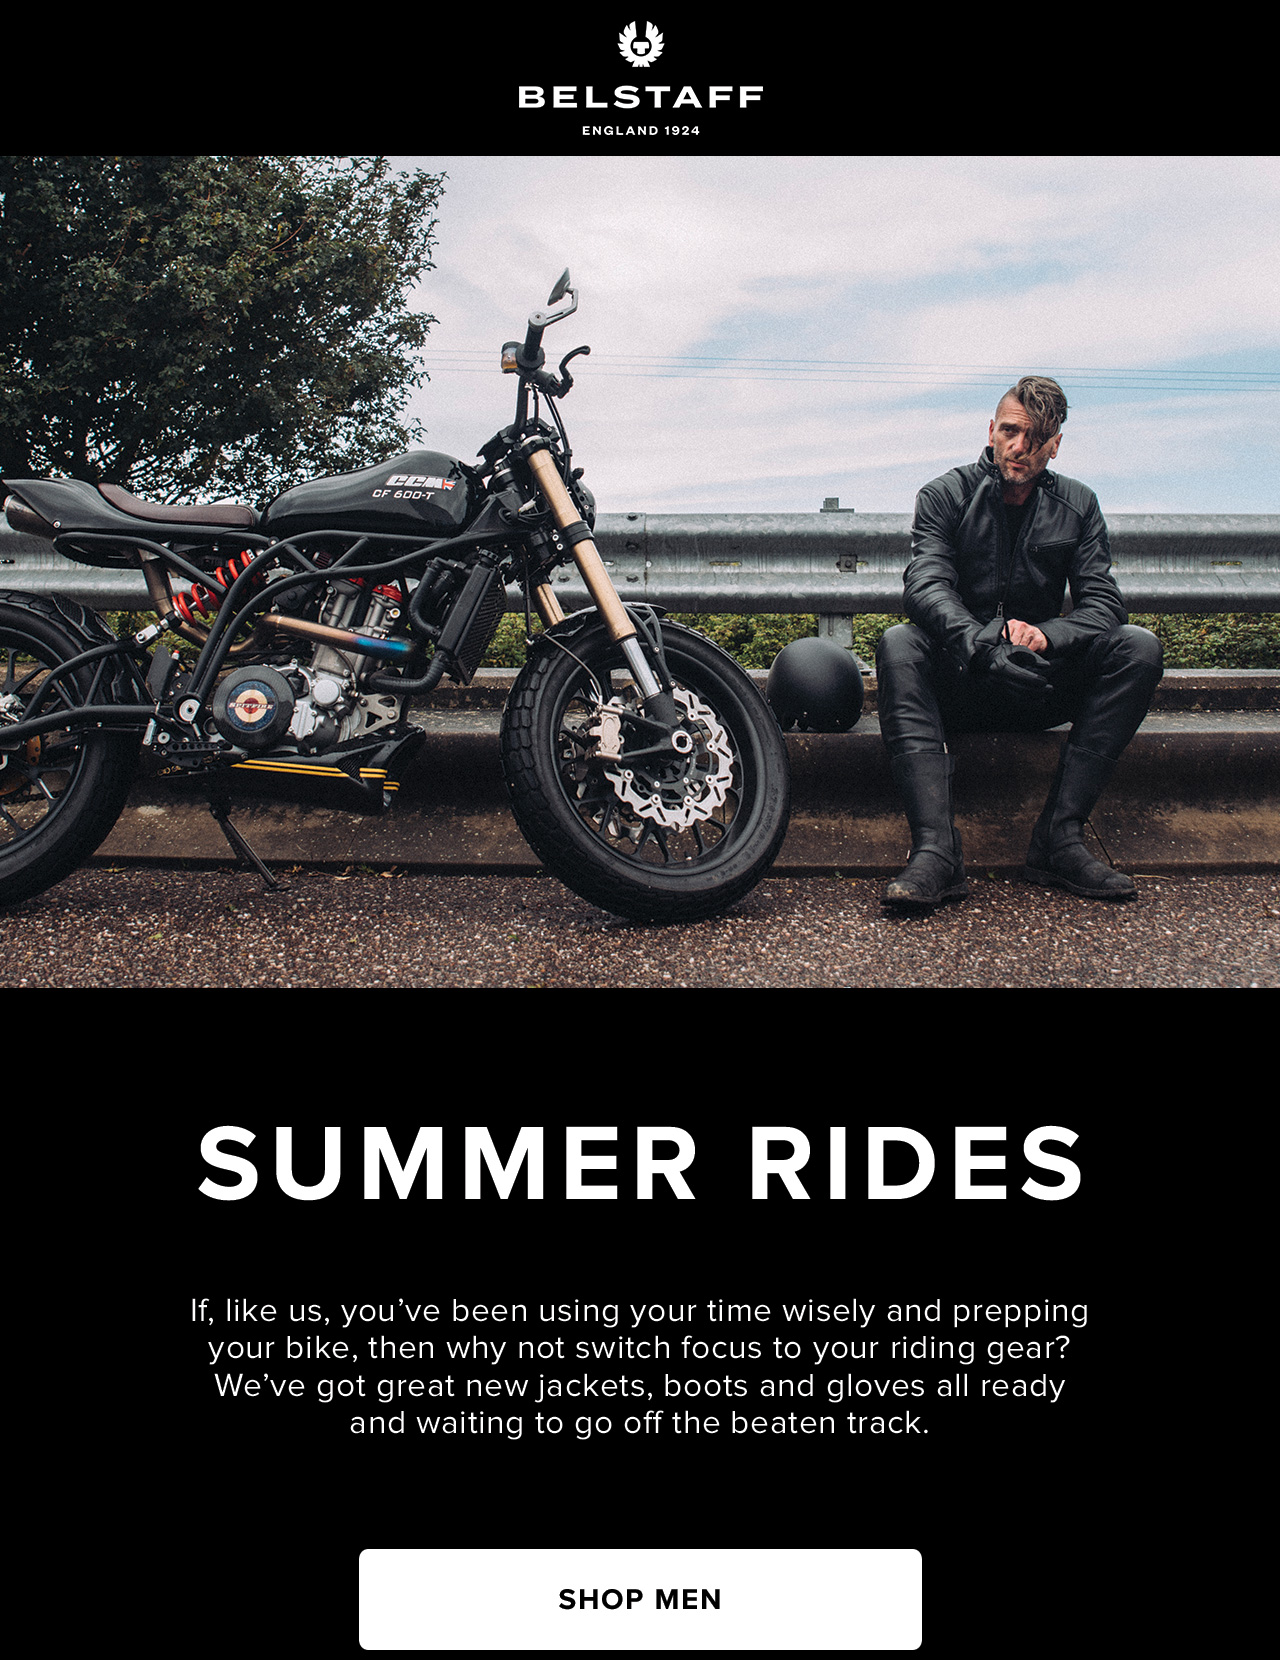 If, like us, you've been using your time wisely and prepping your bike, then why not switch focus to your riding gear? We've got great new jackets, boots and gloves all ready and waiting to go off the beaten track. 